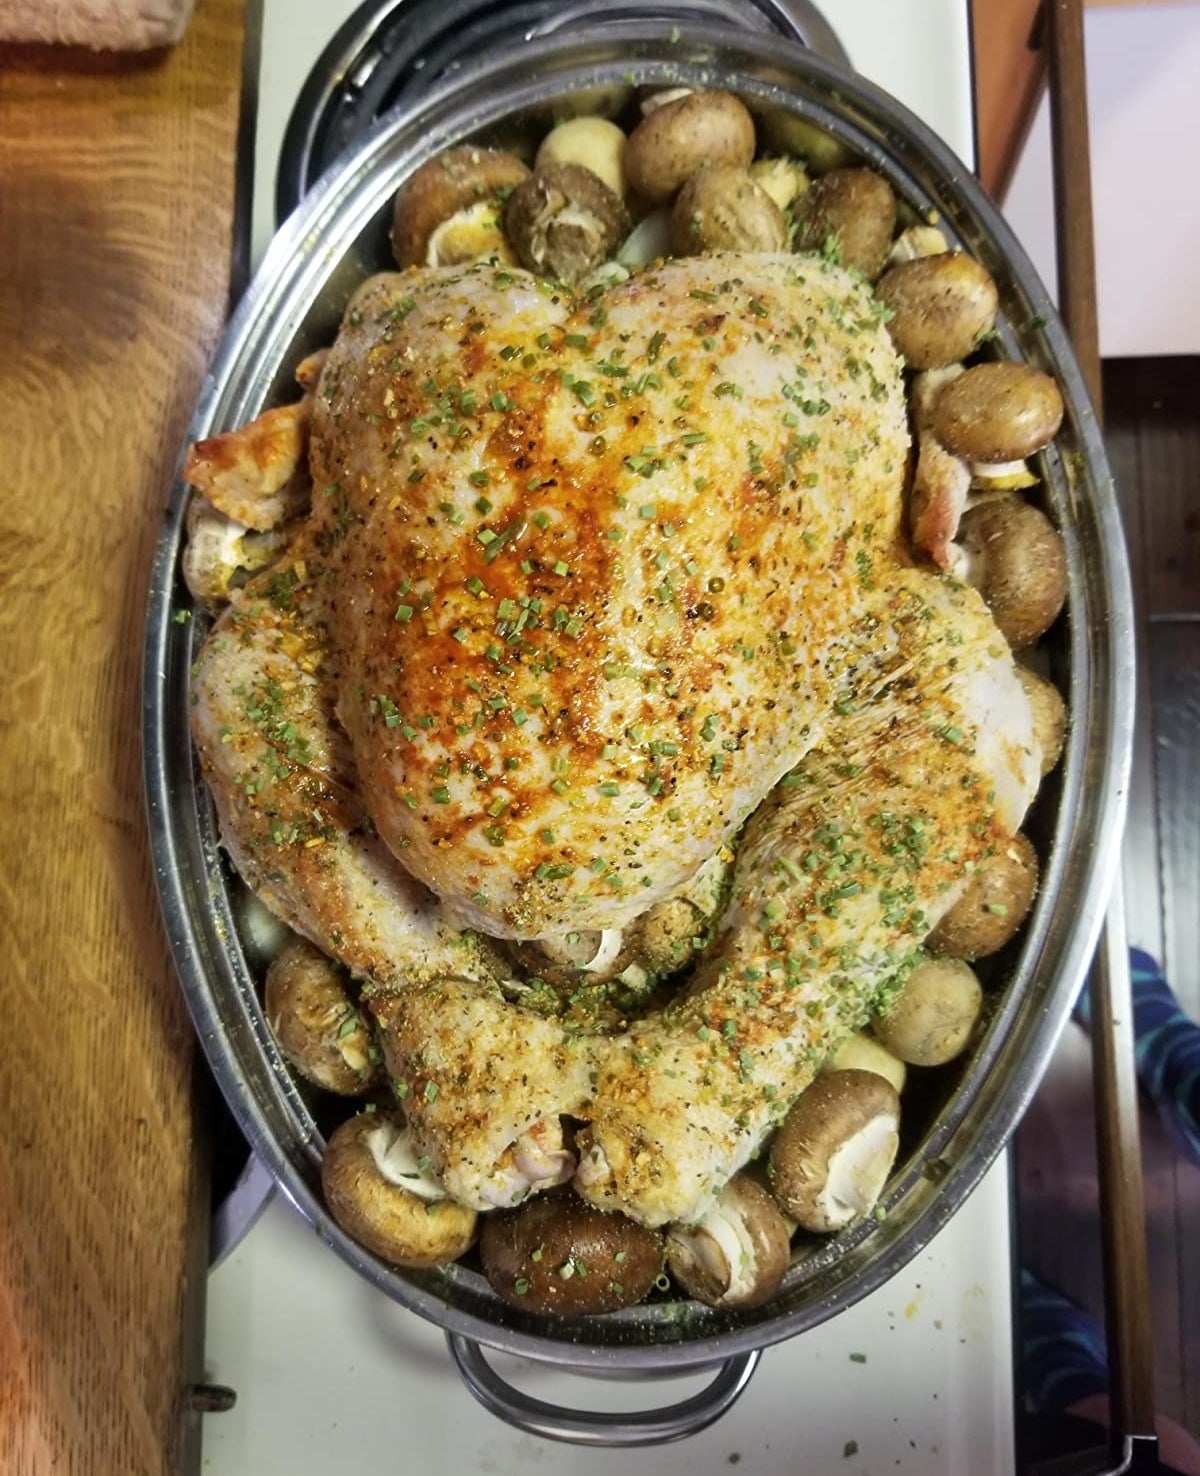 Reviewer photo of a turkey and vegetables inside the roaster